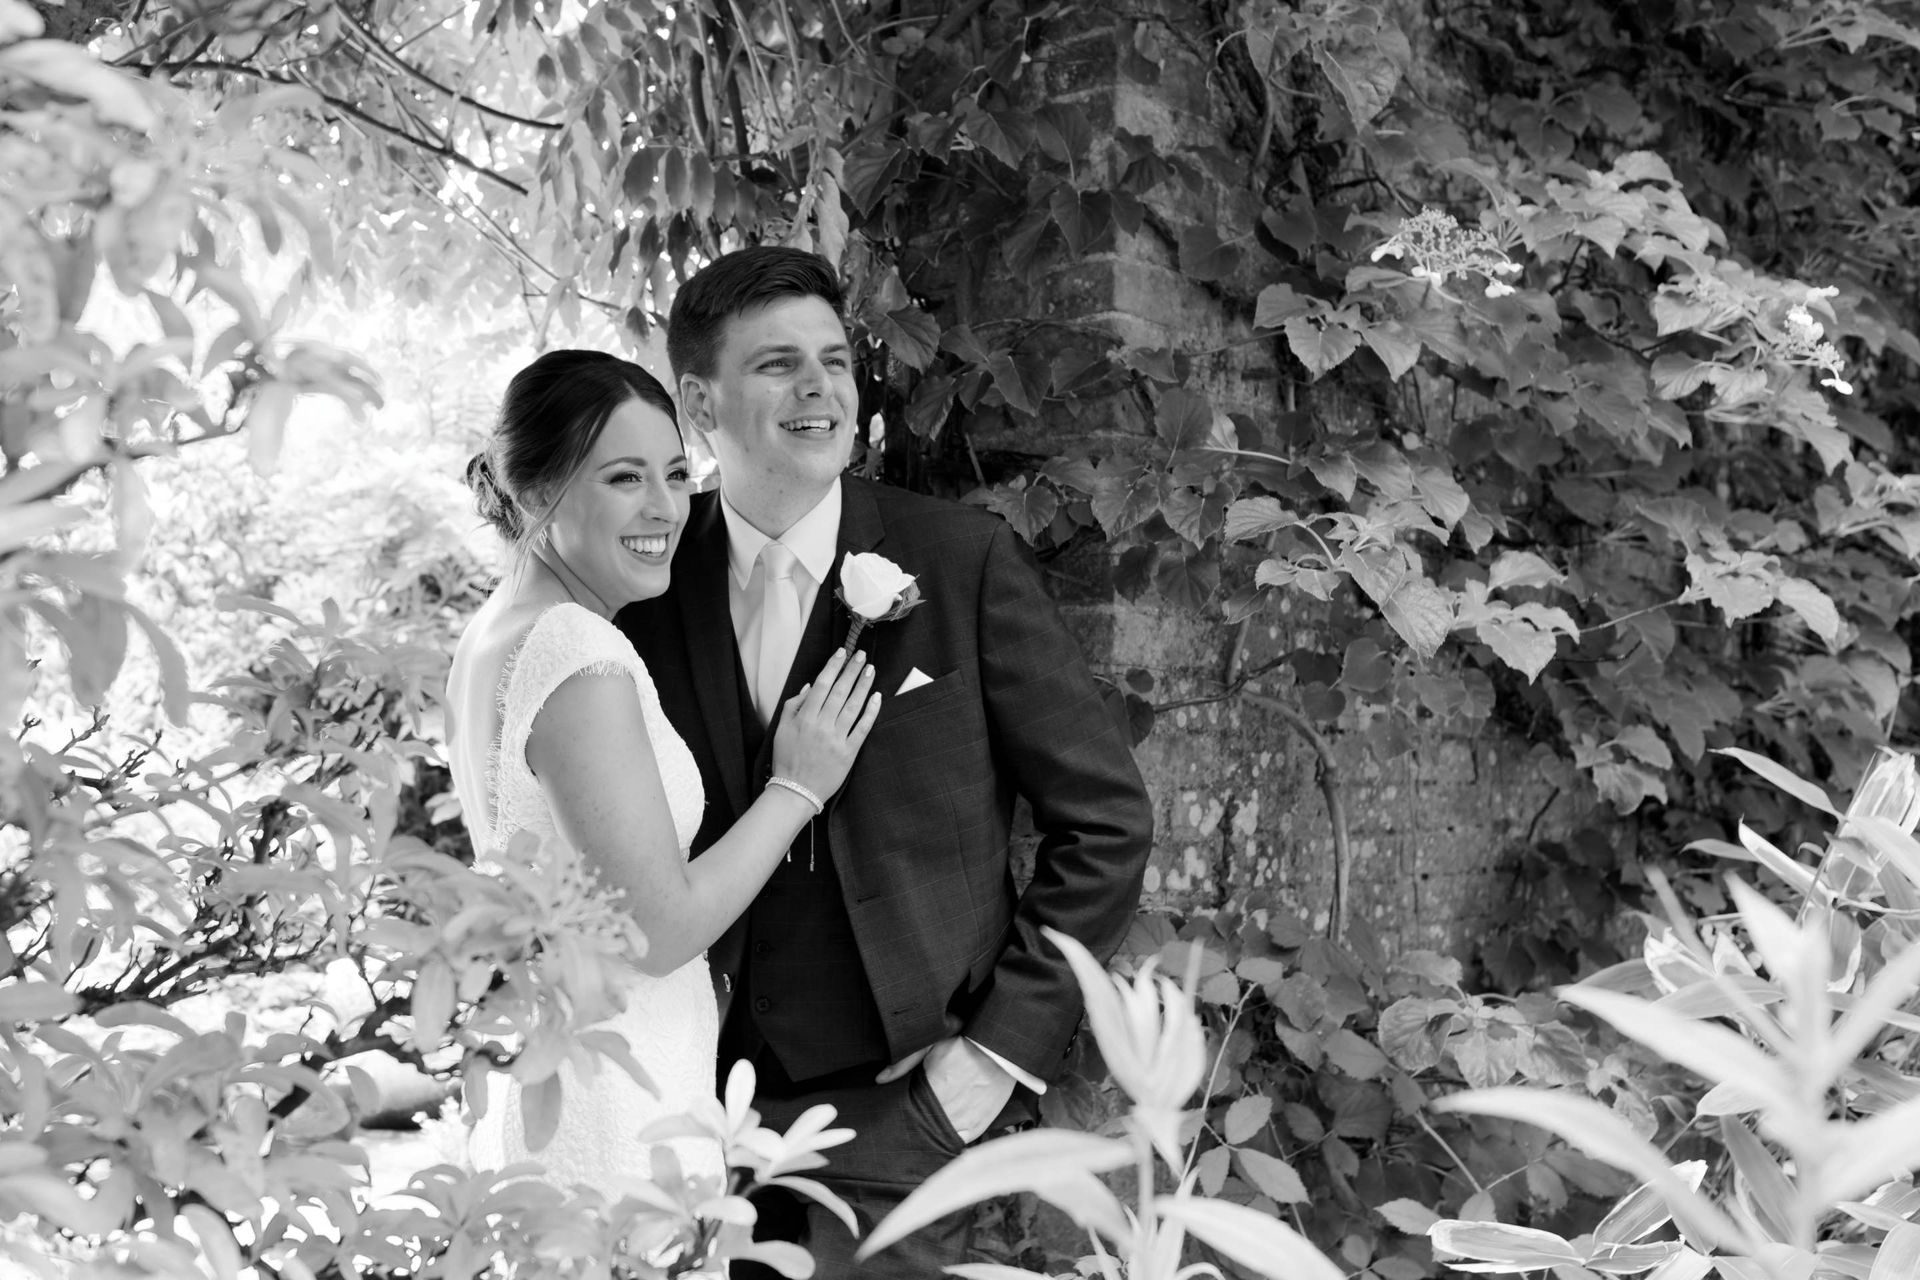 A black and white photo of a bride and groom standing next to a tree.